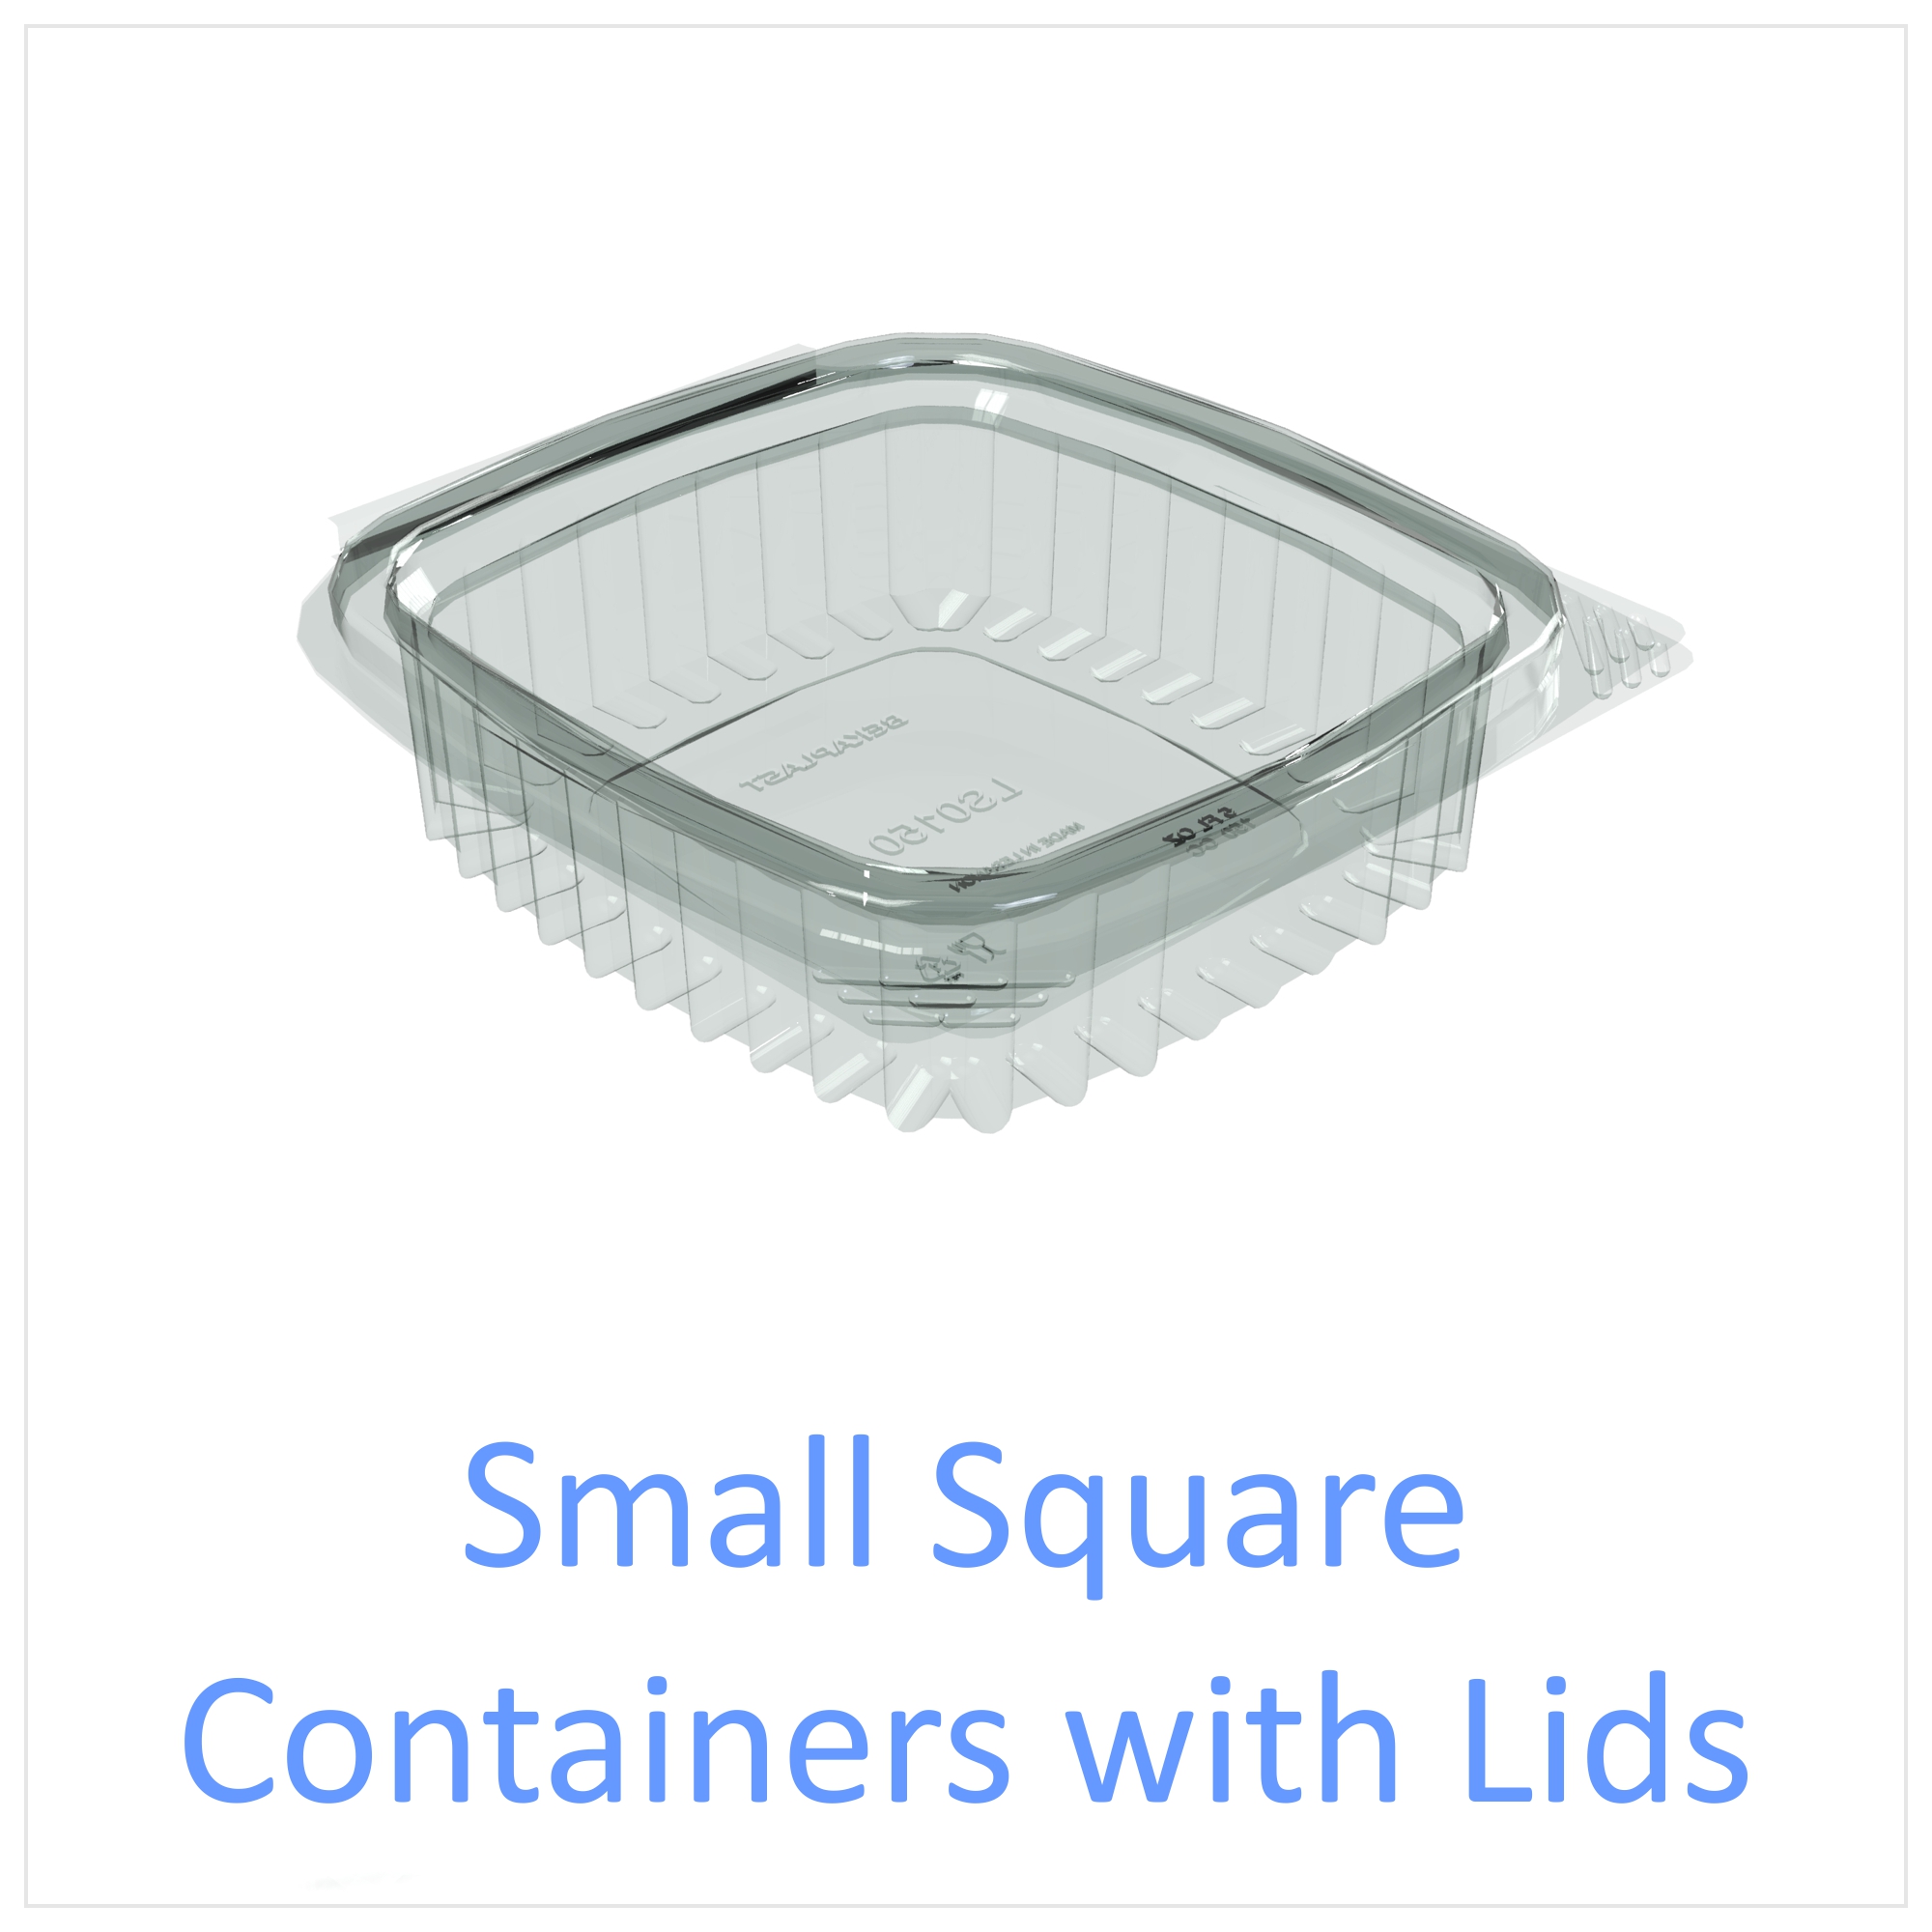 Small Square Containers with Lids